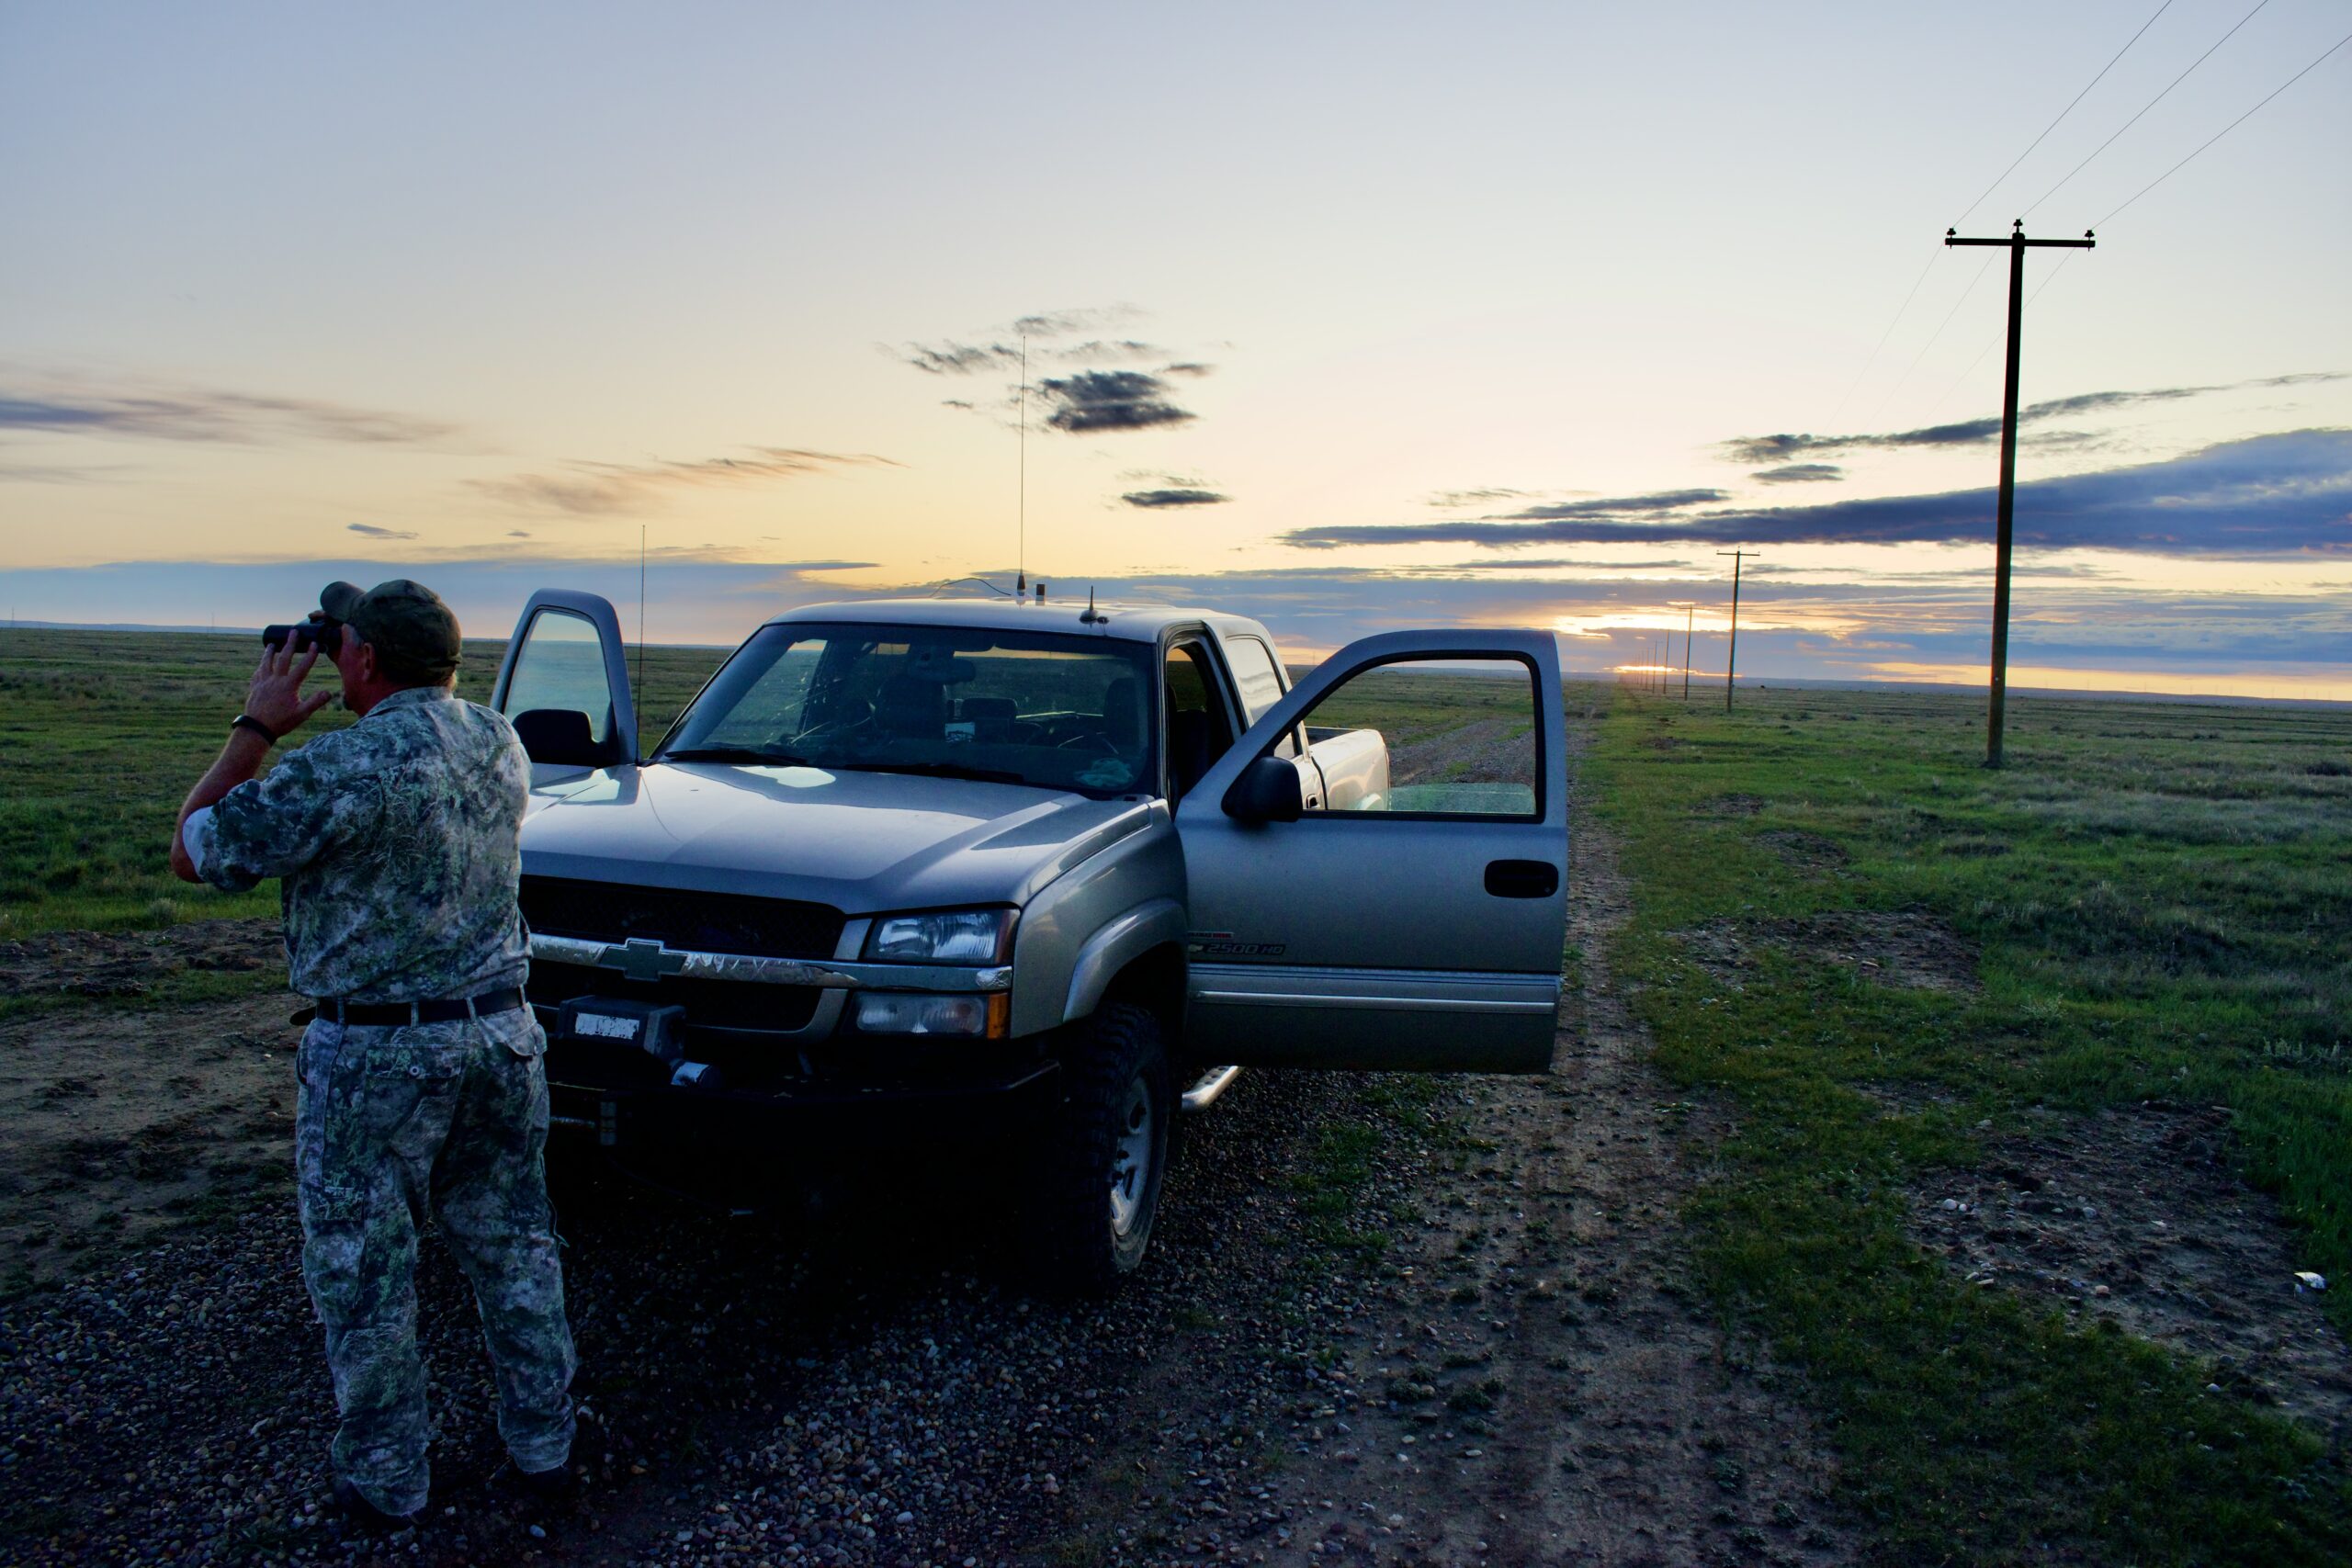 The Complete Guide to Buying Your Next Used Hunting Truck